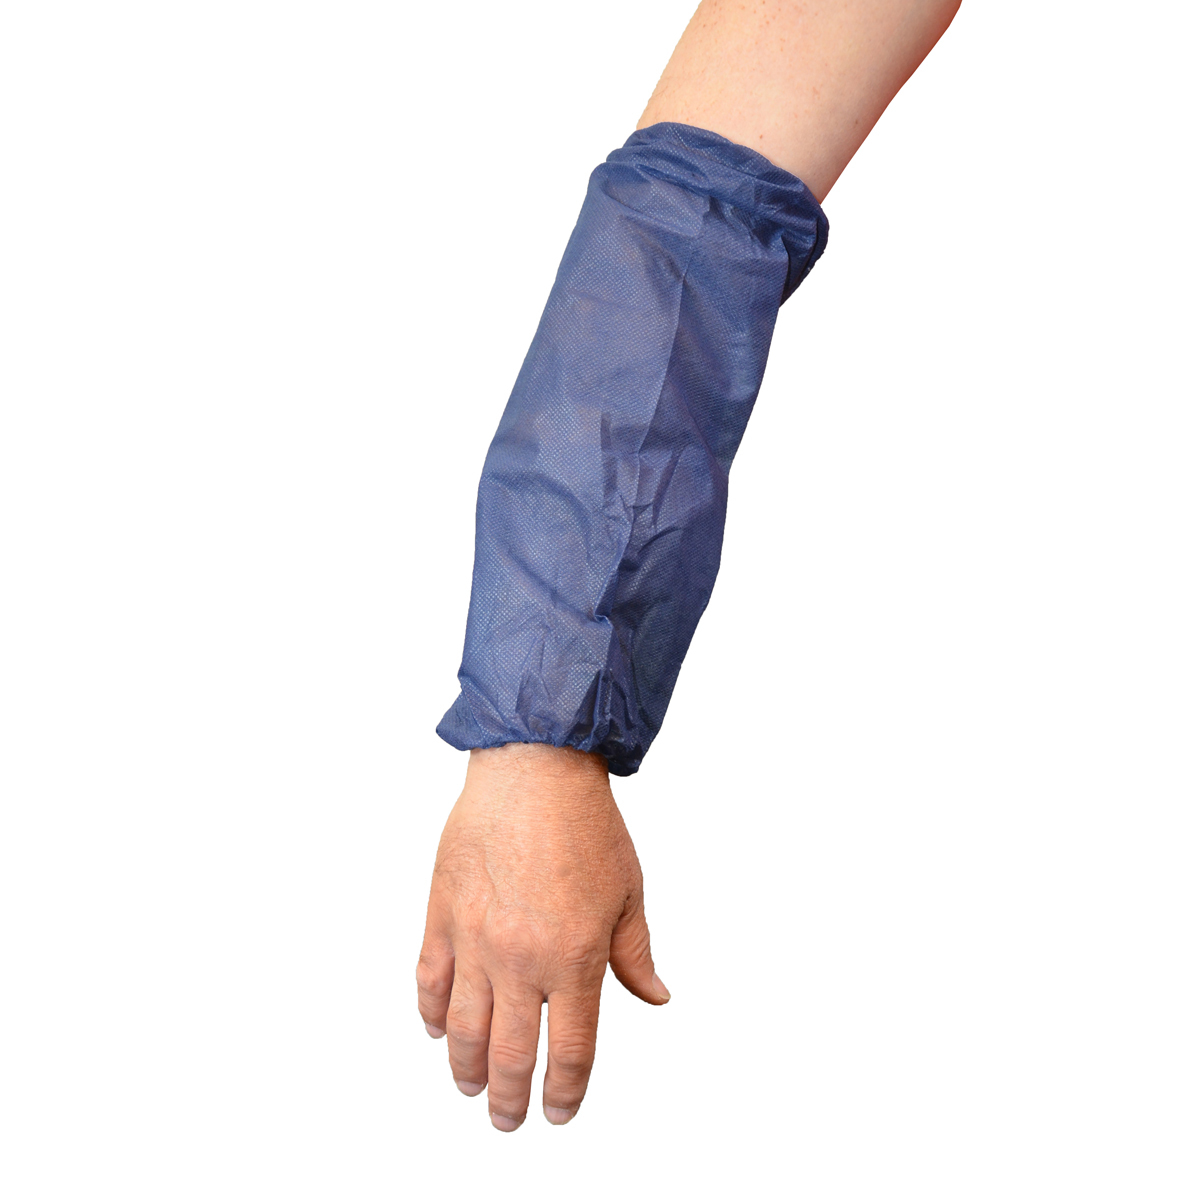 PIP® Blue Polypropylene Disposable Sleeve (Availability restrictions apply.)